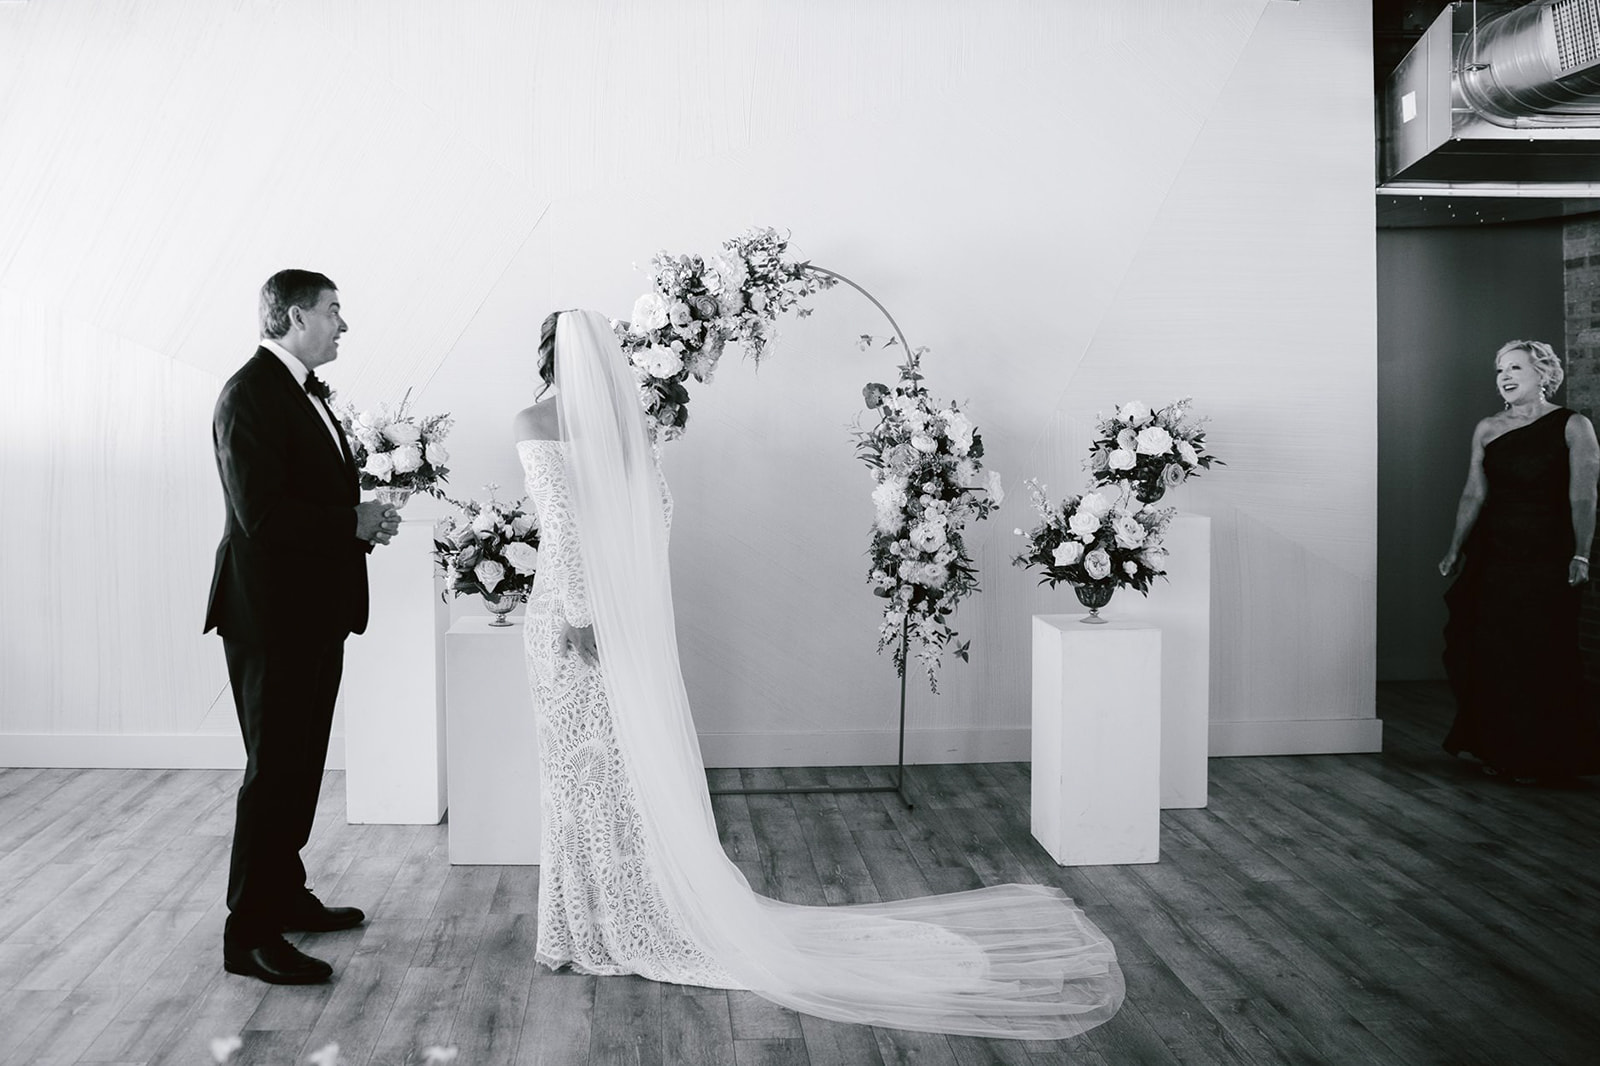 Capturing an emotional moment: The bride shares a heartfelt first look with her parents at Walden Chicago, capturing the